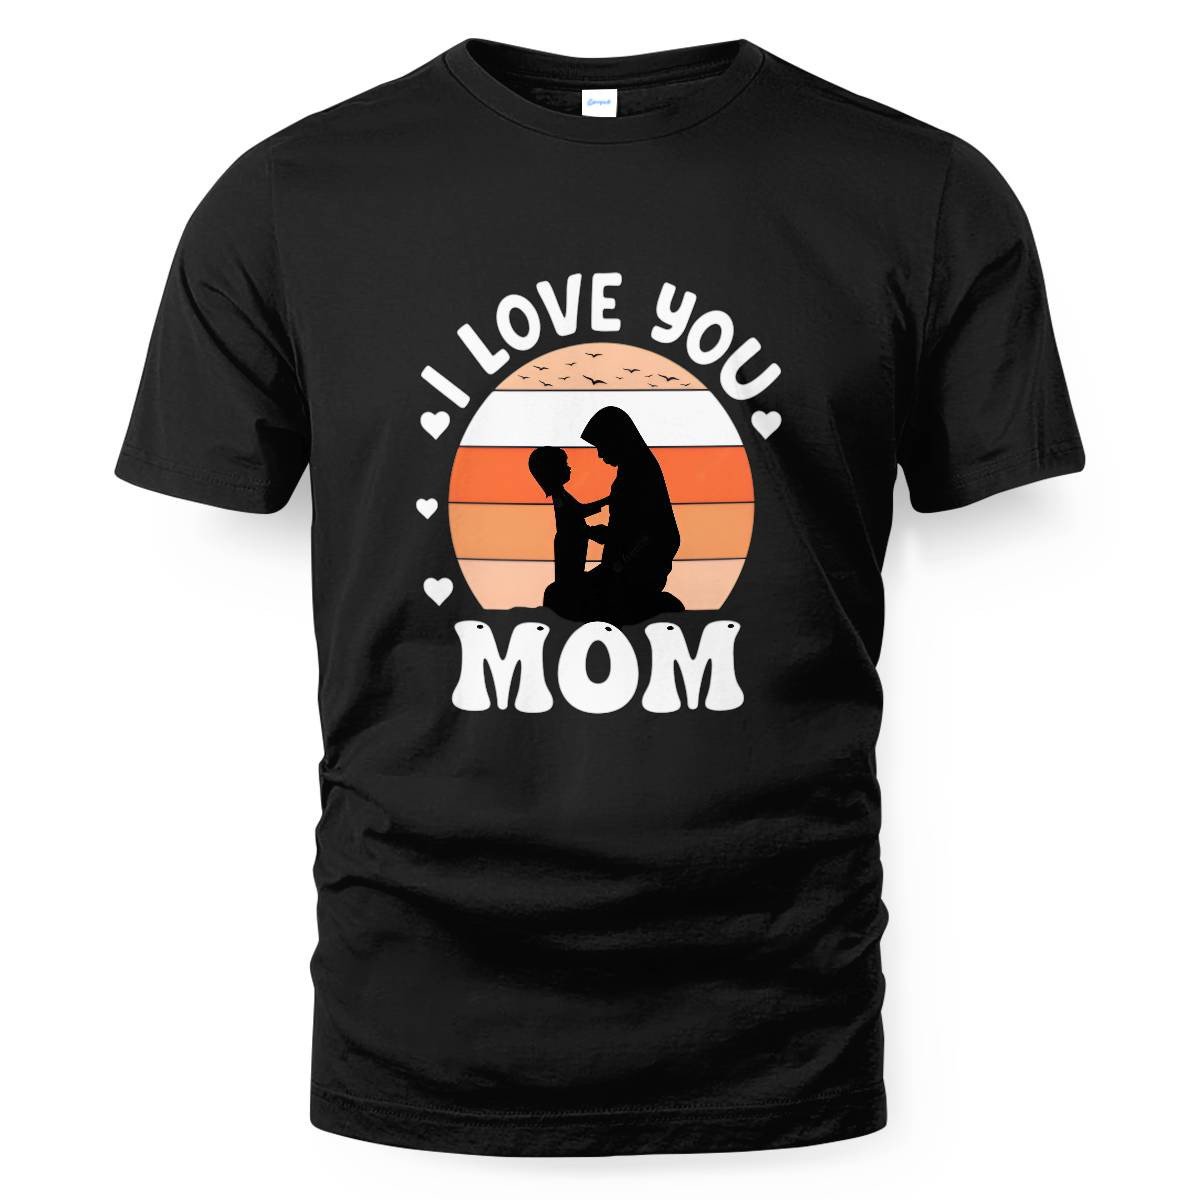 WHO LOVE MOTHER🌹 ? ORDER THIS T-shirt 👕 FOR MOTHERS DAY 🛍️⬇️ 
1st  T-shirt : giftshopcorner.com/collections/na… 
2nd T-shirt : giftshopcorner.com/collections/na…